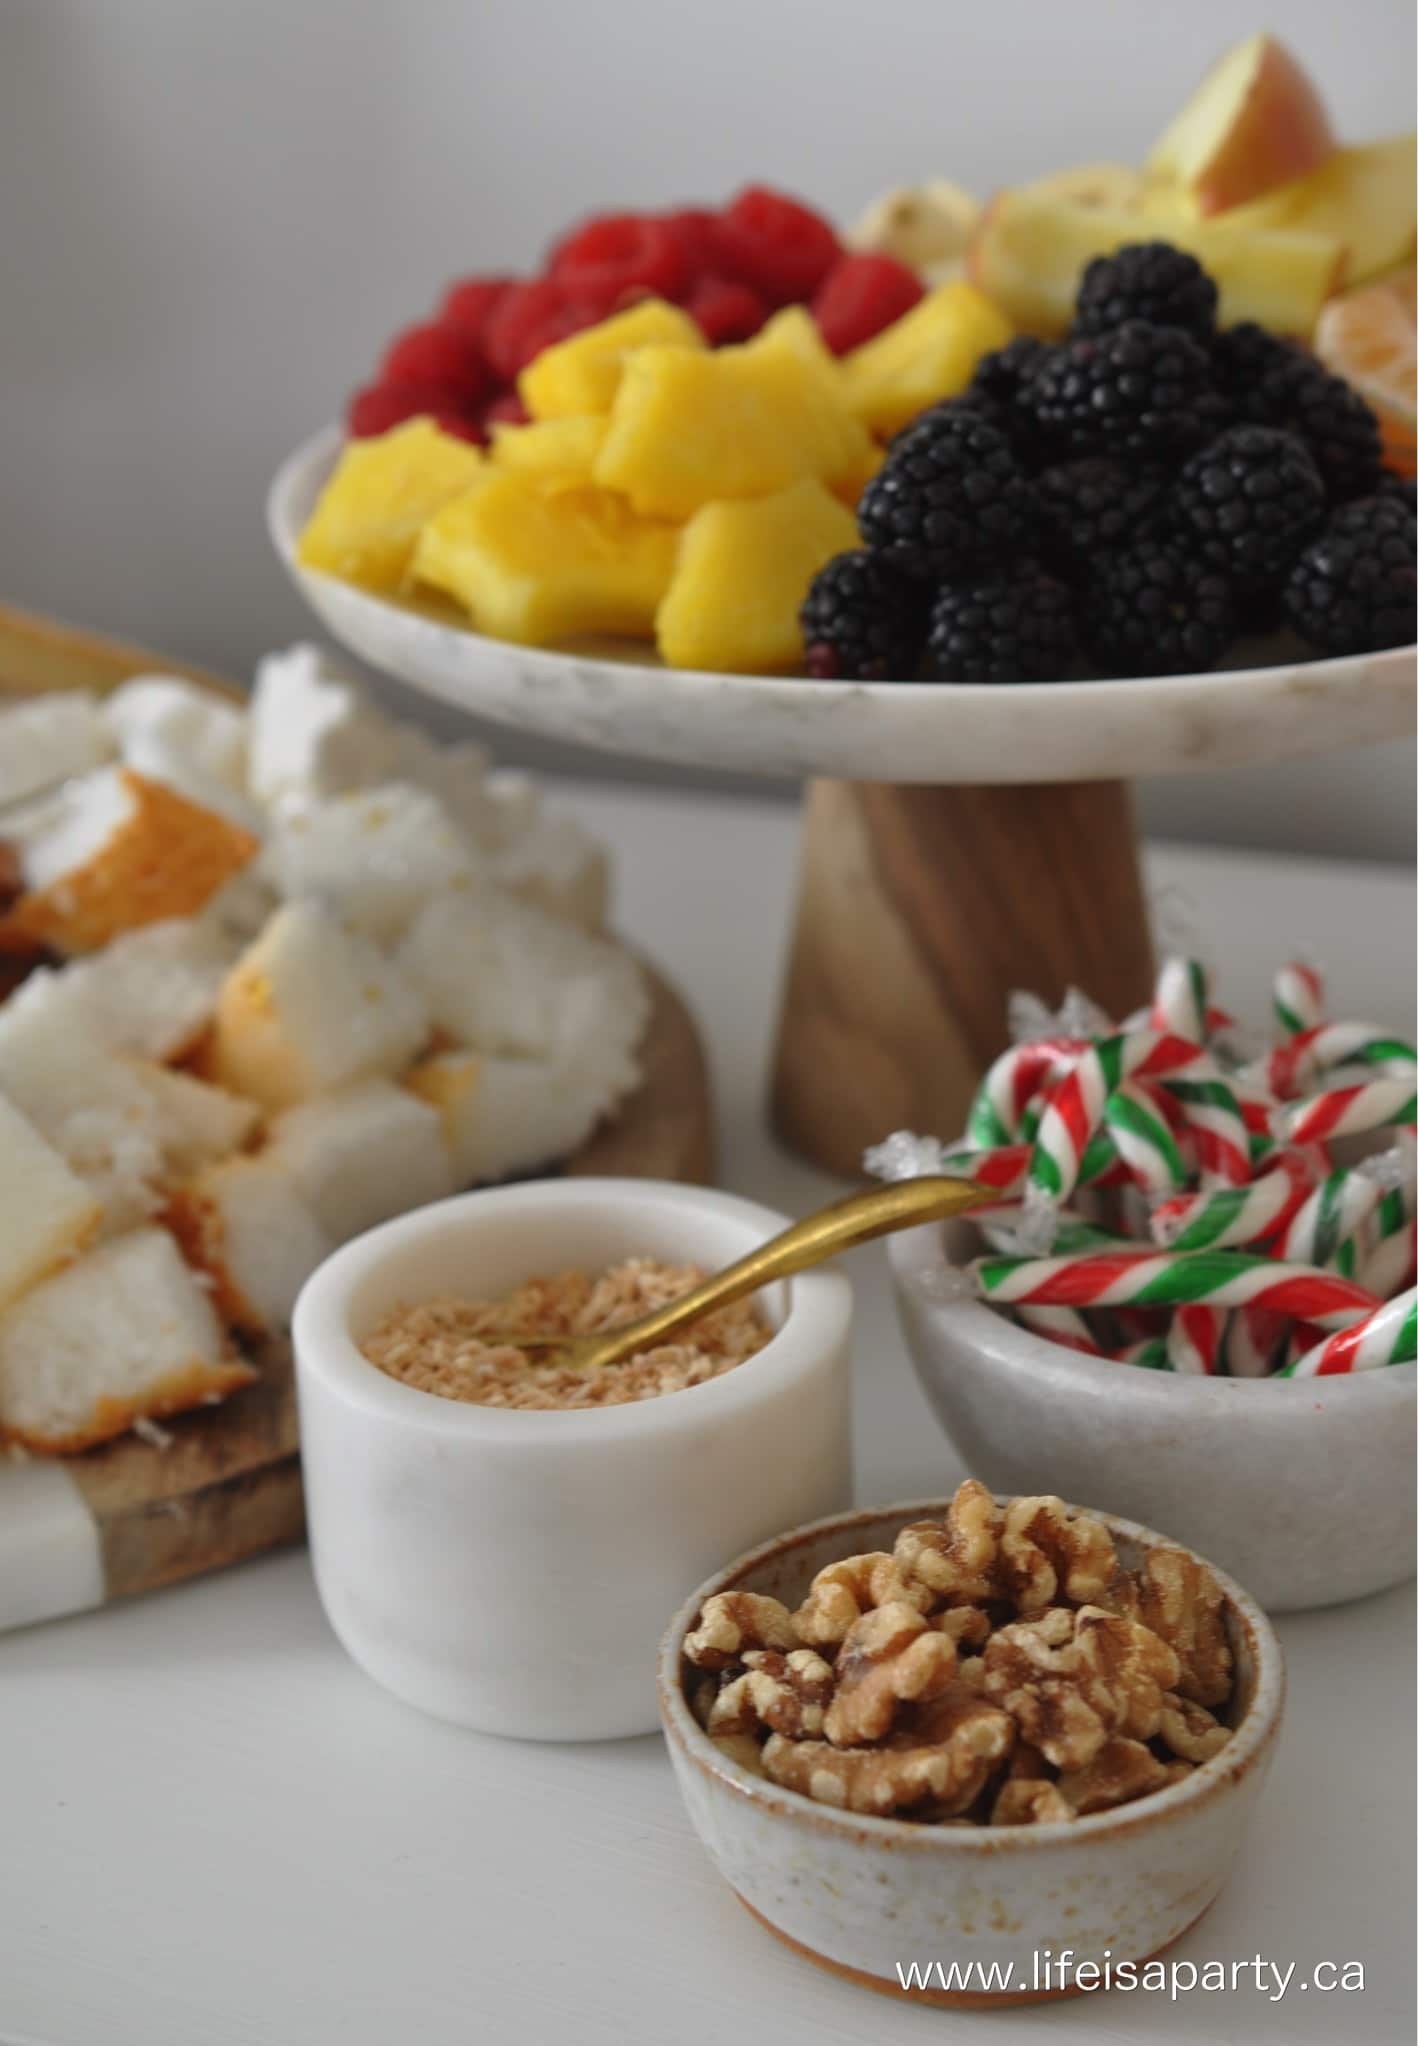 Dessert fondue dippers, included fruit, candy and nuts.